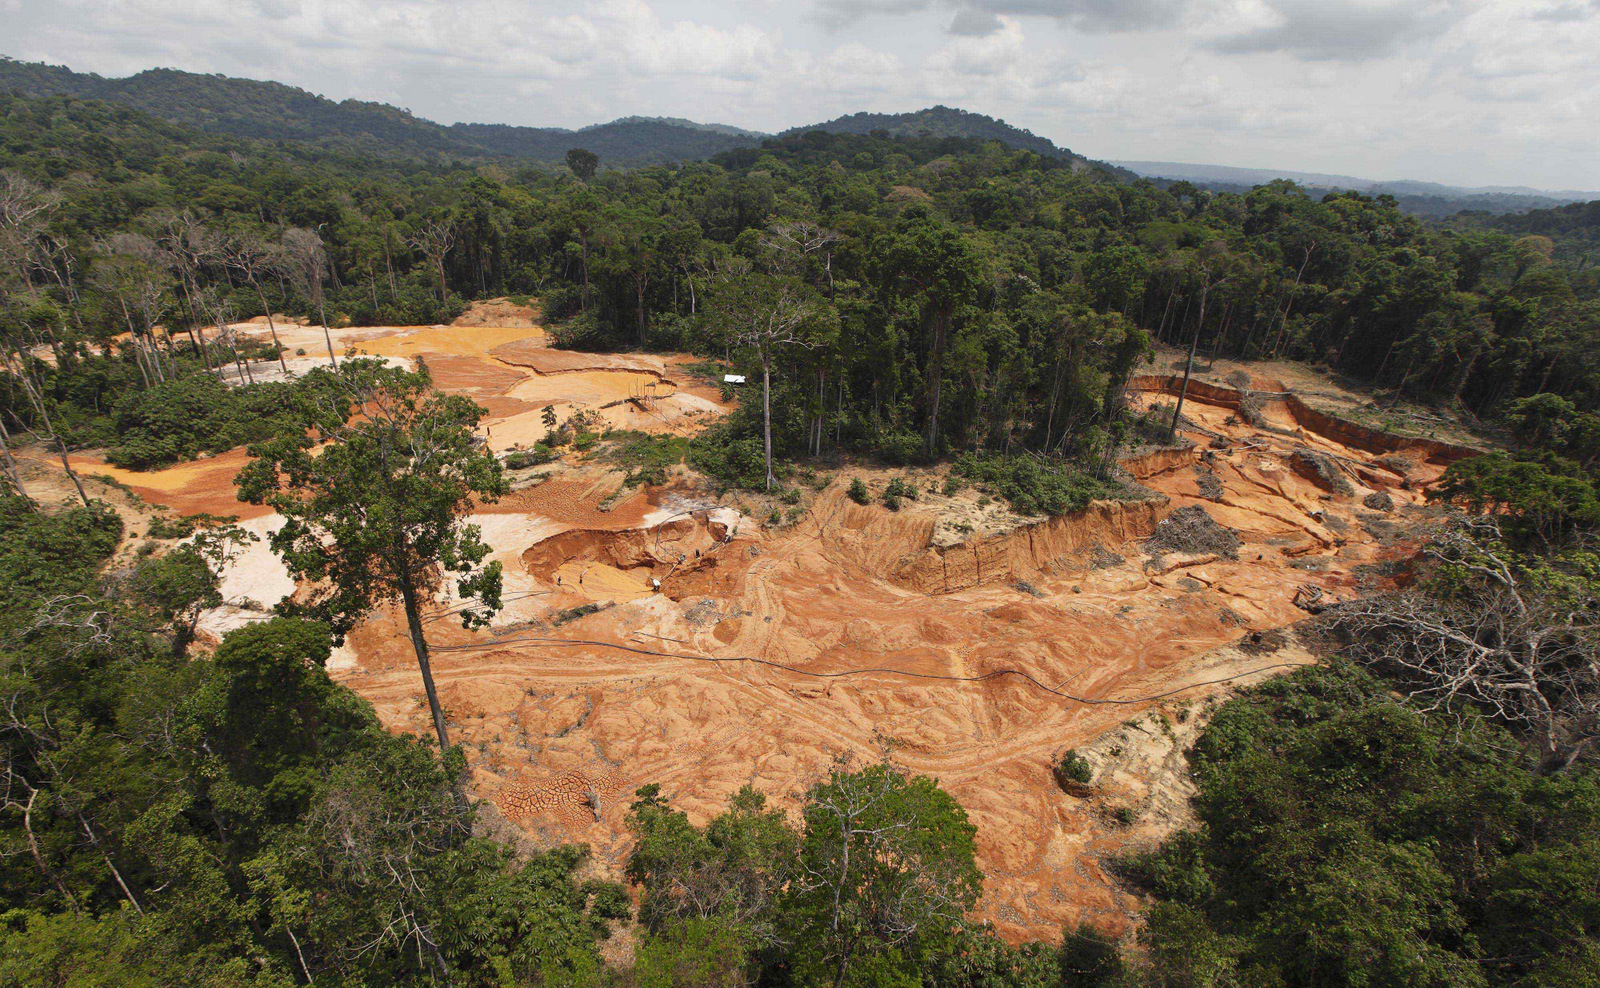 A gold mine is seen in a national park forest near Novo Progresso in Brazil's northern state of Para. (AP/Andre Penner)